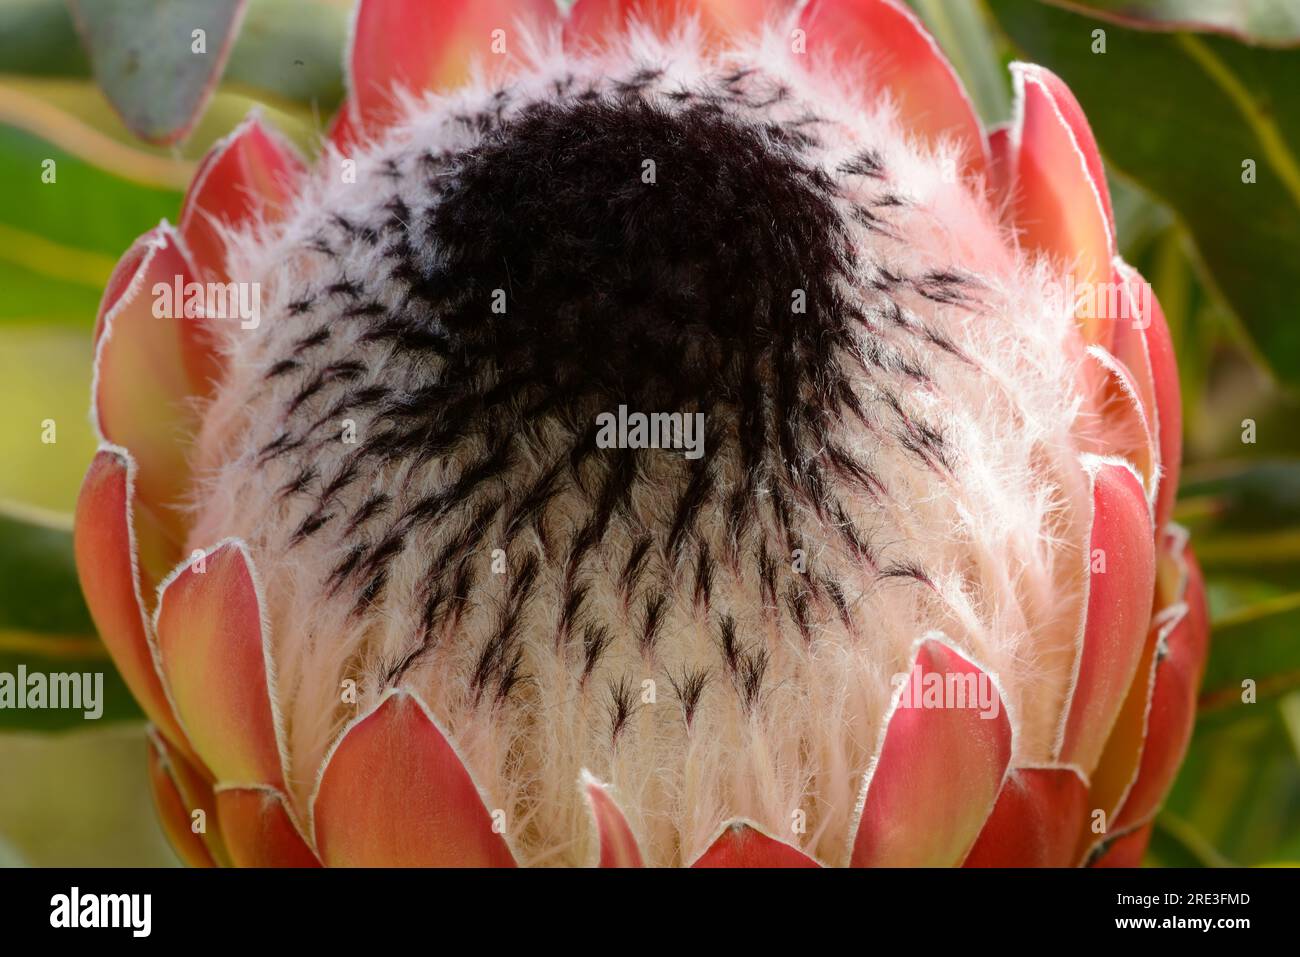 King protea South African flower with large striking pink display Stock Photo